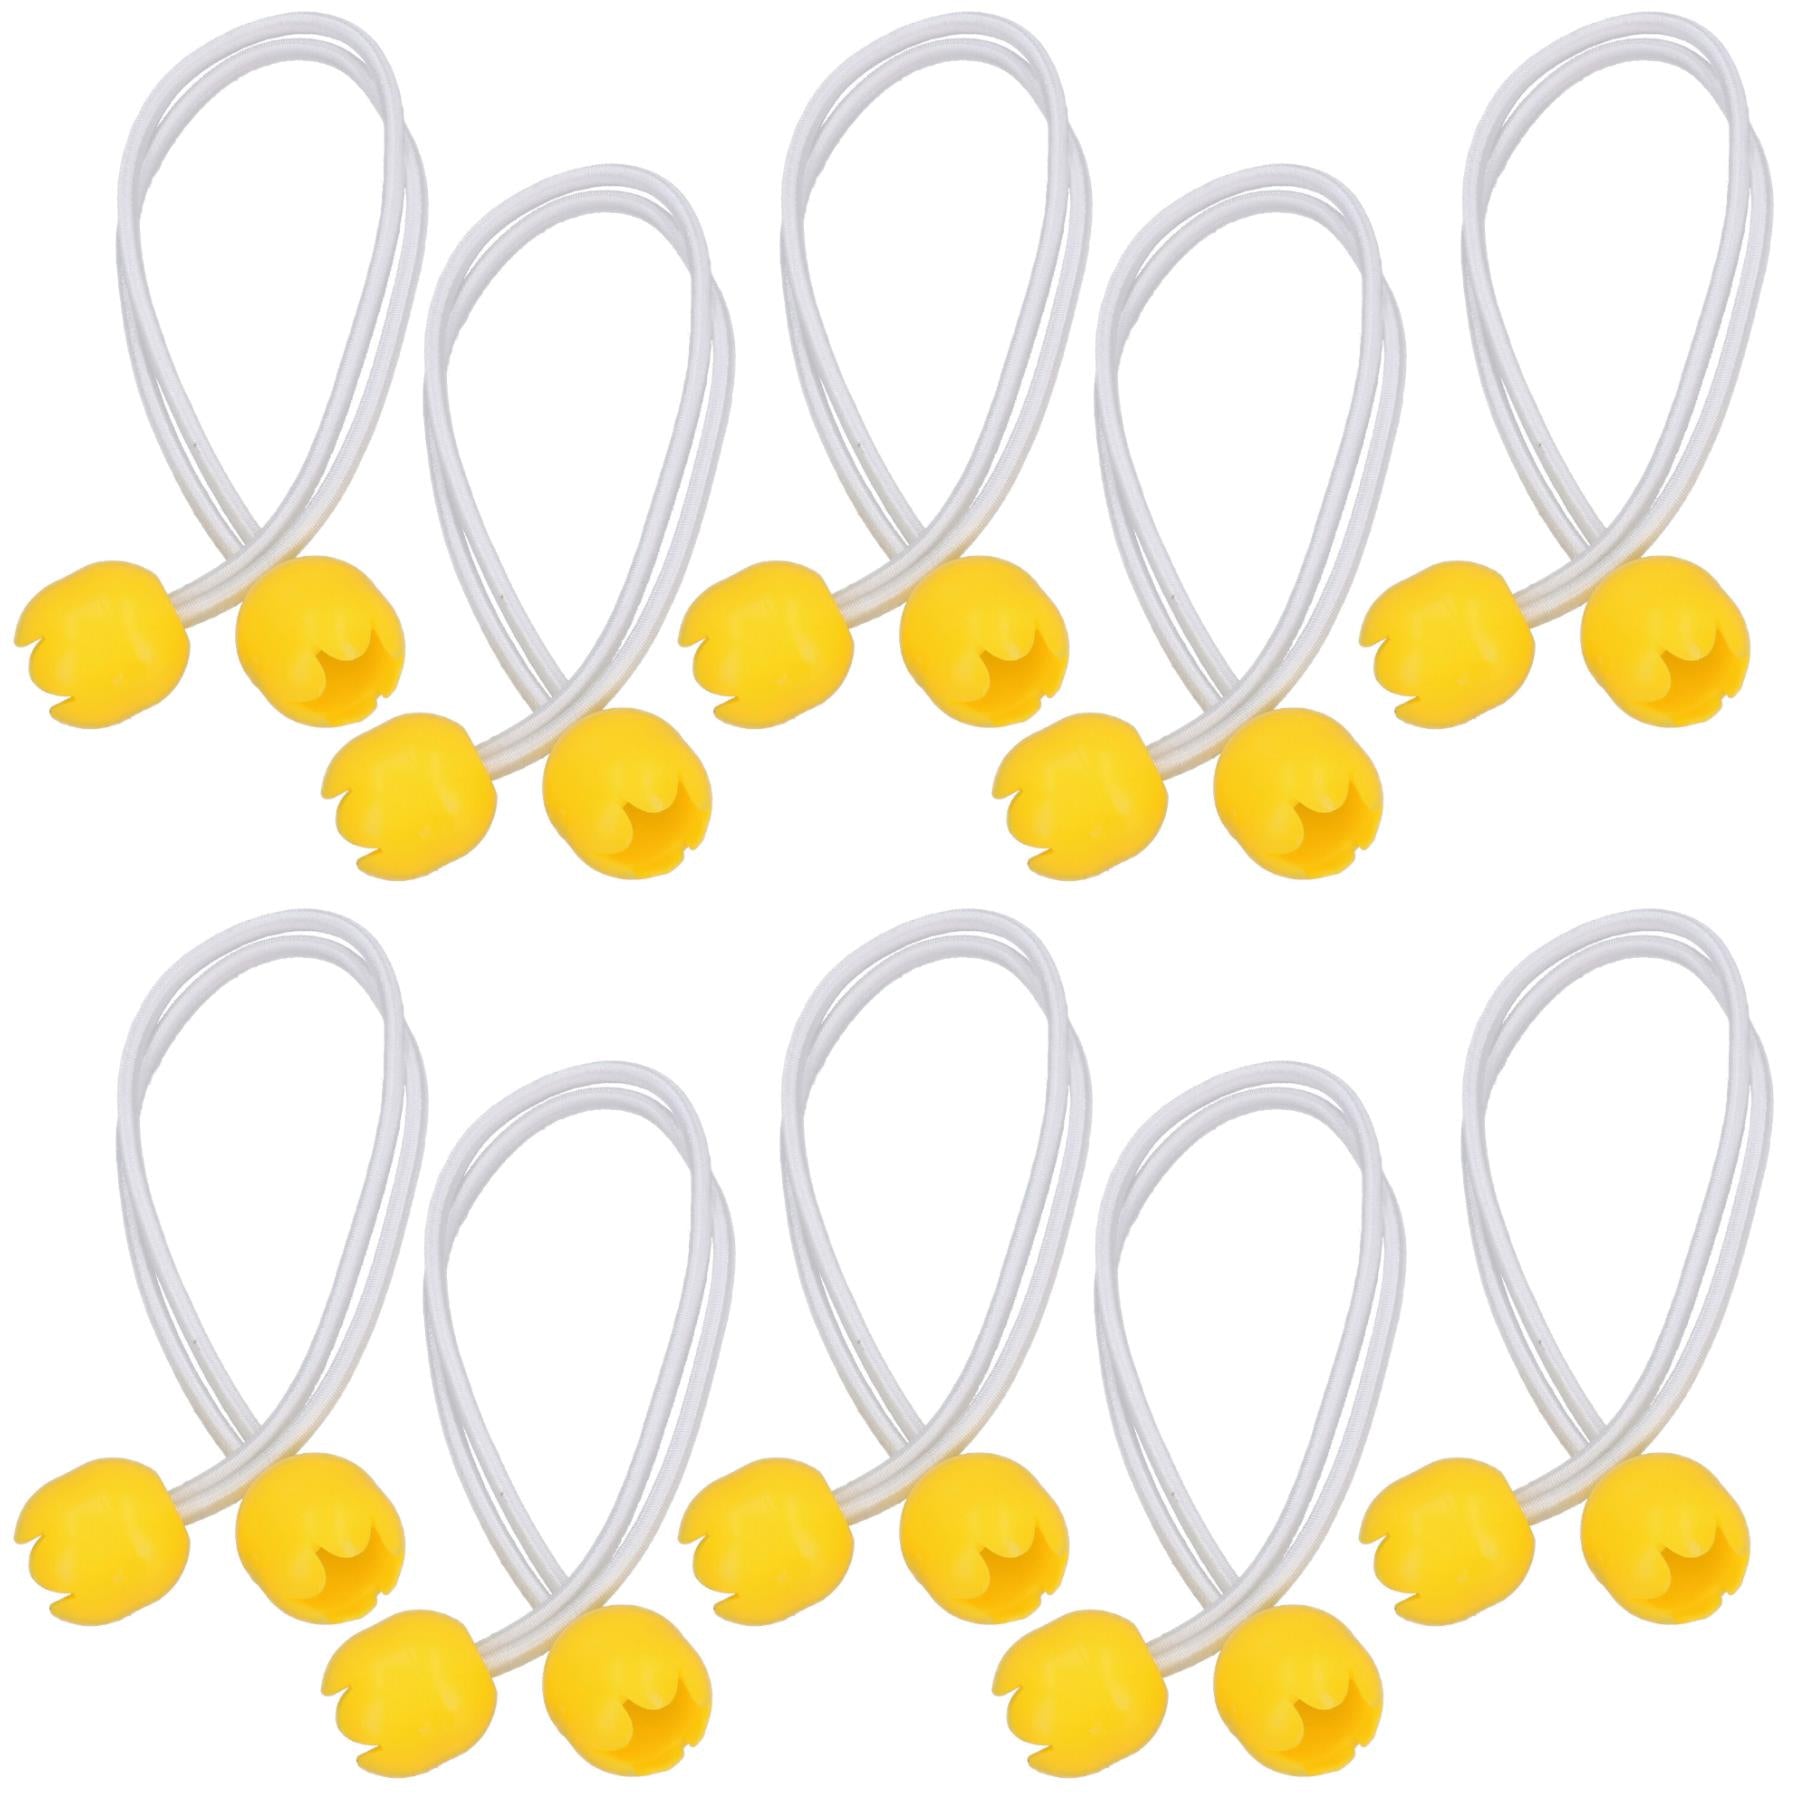 10 Pack Sail Ties Bungee Balls 30-50cm Long 4mm Shock Cord Boat Yacht Dinghy